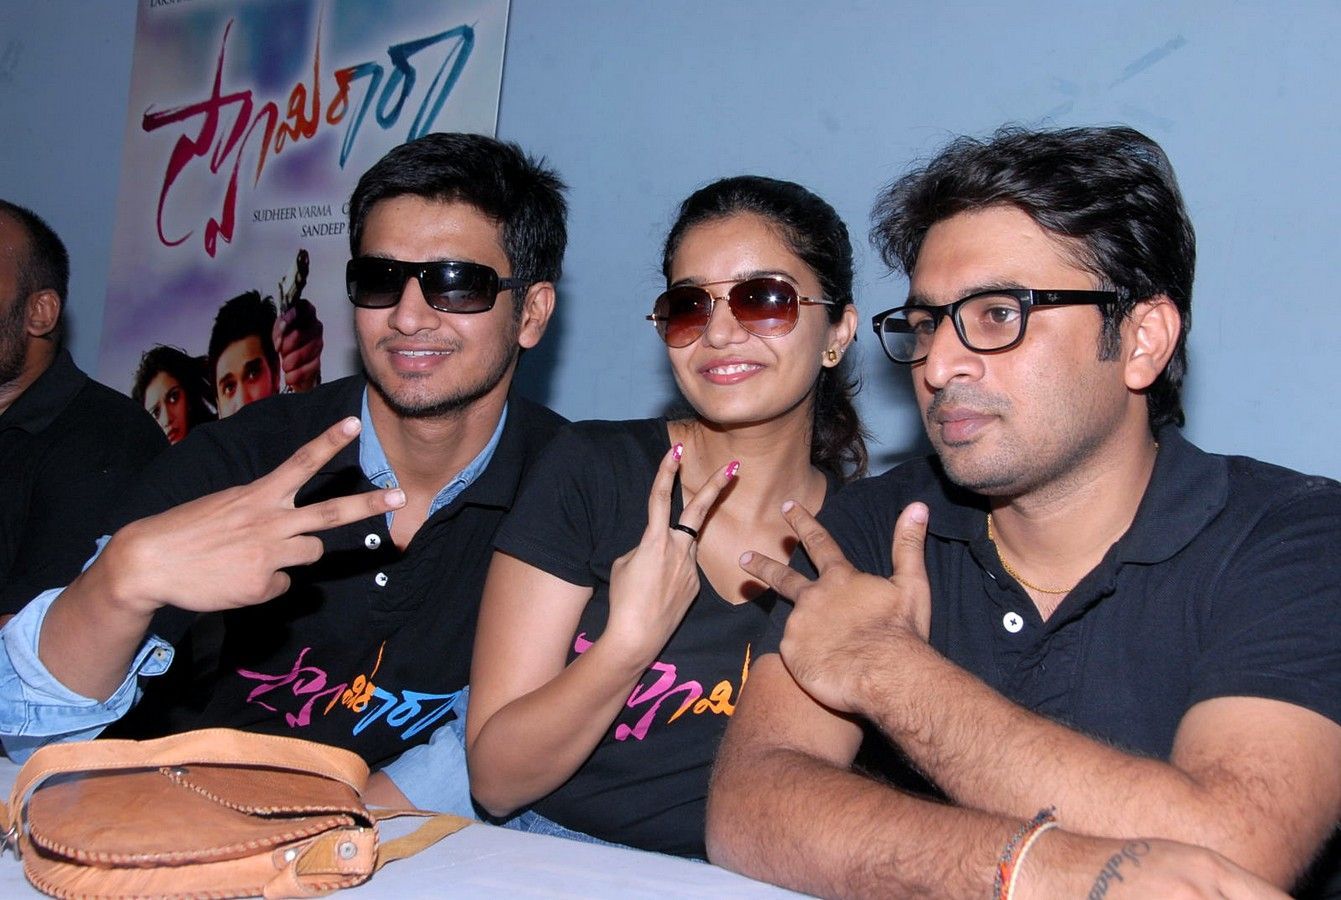 Swami Ra Ra Success Meet Pictures | Picture 416867